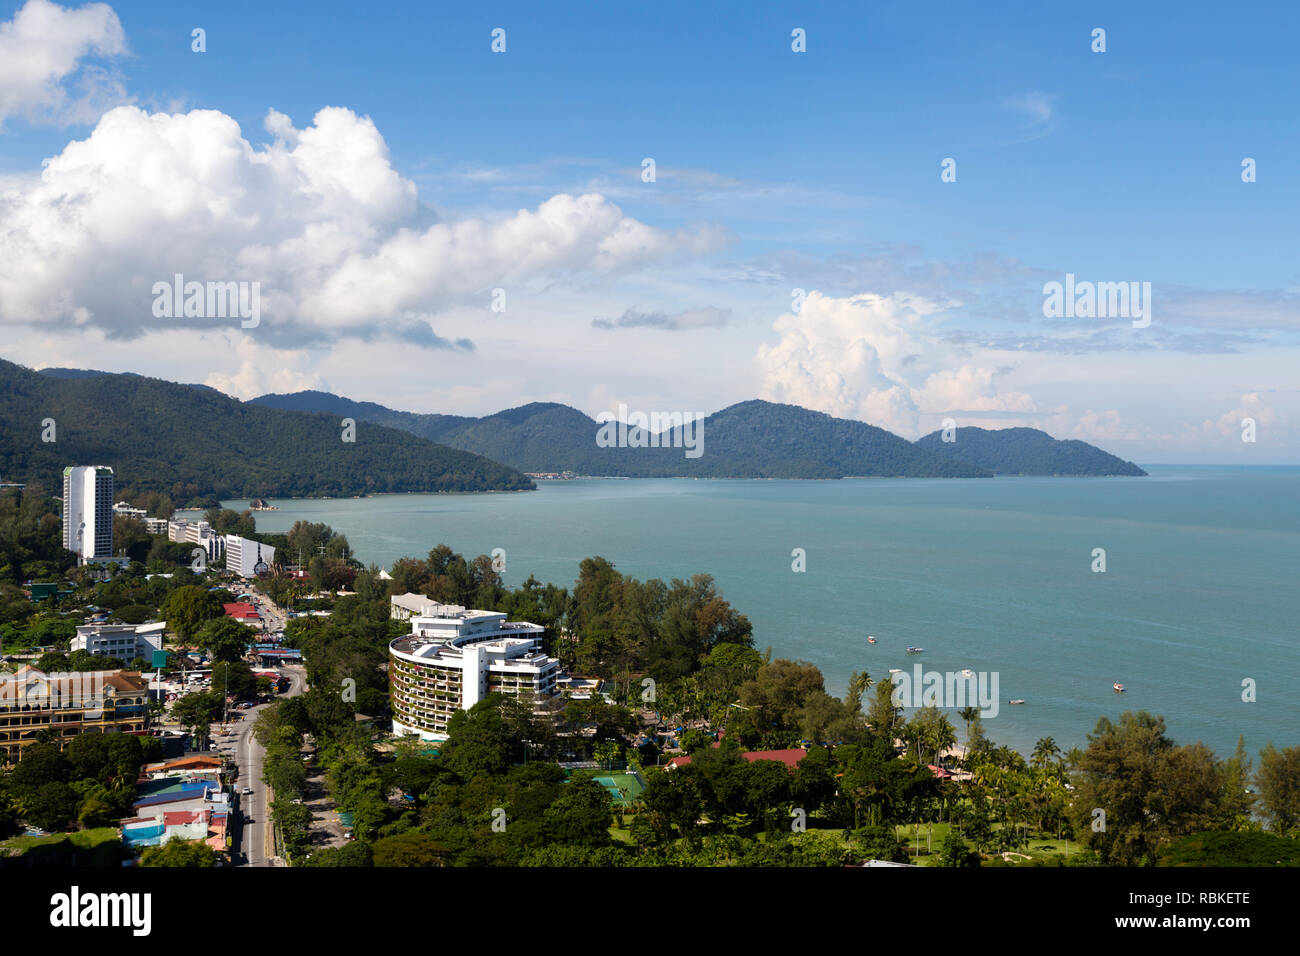 Aerial view of Batu Ferringhi Beach and Penang National Park located in the Malacca Strait on Penang Island, Malaysia. Batu Ferringhi is a popular tra Stock Photo